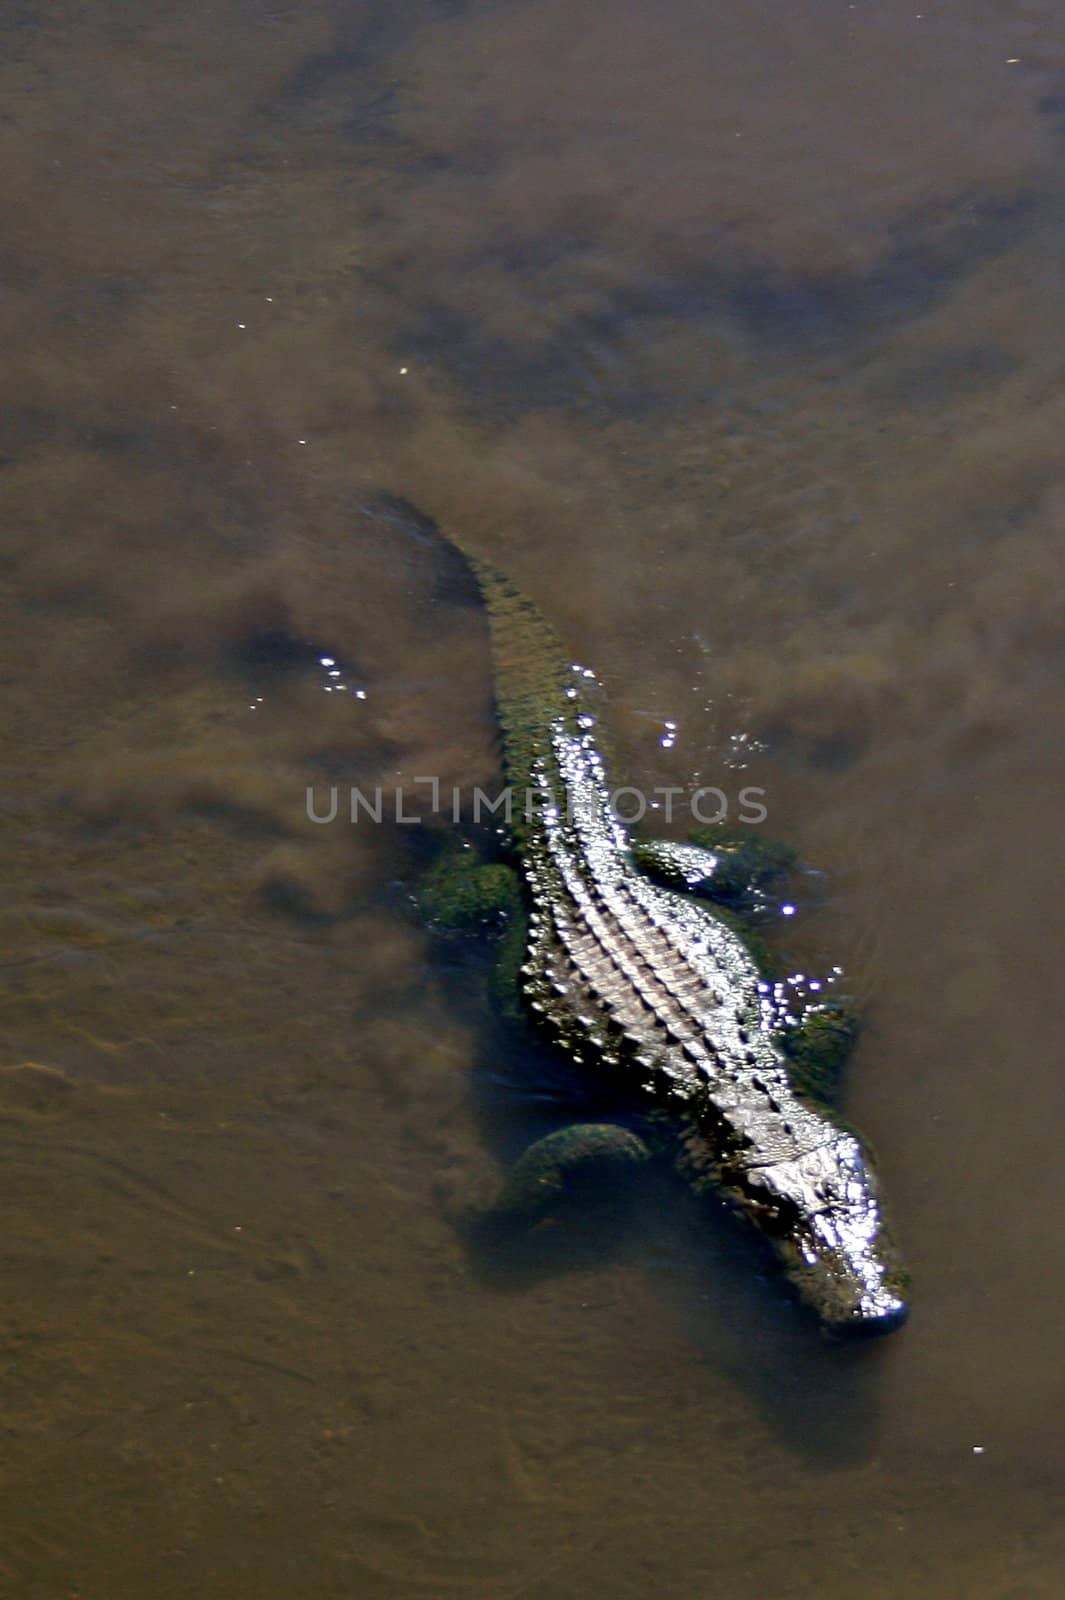 An allligator swimming in a lake